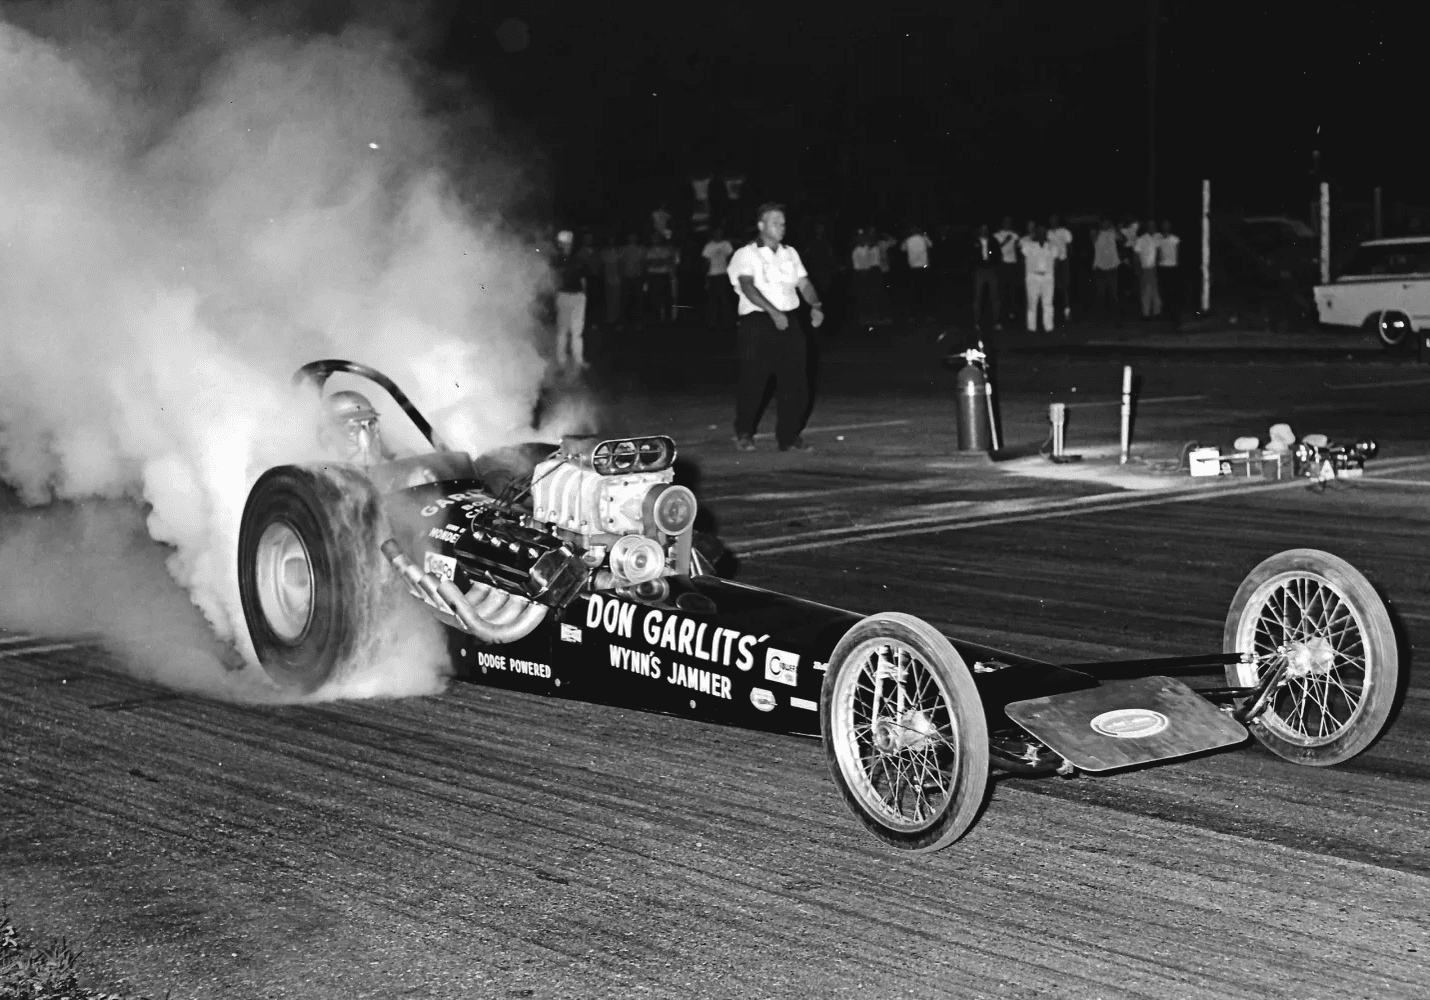 Built in 1964, it was the first Garlits car to have a “Swoopy Tail,” and SR VI would accomplish several things. On Aug. 1, 1964 in Great Meadows, NJ, it set the official NHRA record of 201 MPH with a 7.78 sec. ET. In September 1964, the car would win the prestigious NHRA Nationals. September through October 1964, Swamp Rat VI would compete on the U.S Drag Team in the British Drag Festival, winning the event and setting a new British land speed Record of 197.00 MPH. Swamp Rat VI was successful in the top fuel ranks until the chute failed and causing a bad crash. During it’s time, Swamp Rat VI would have a top speed of 206.42 MPH and an ET of 7.76 seconds.